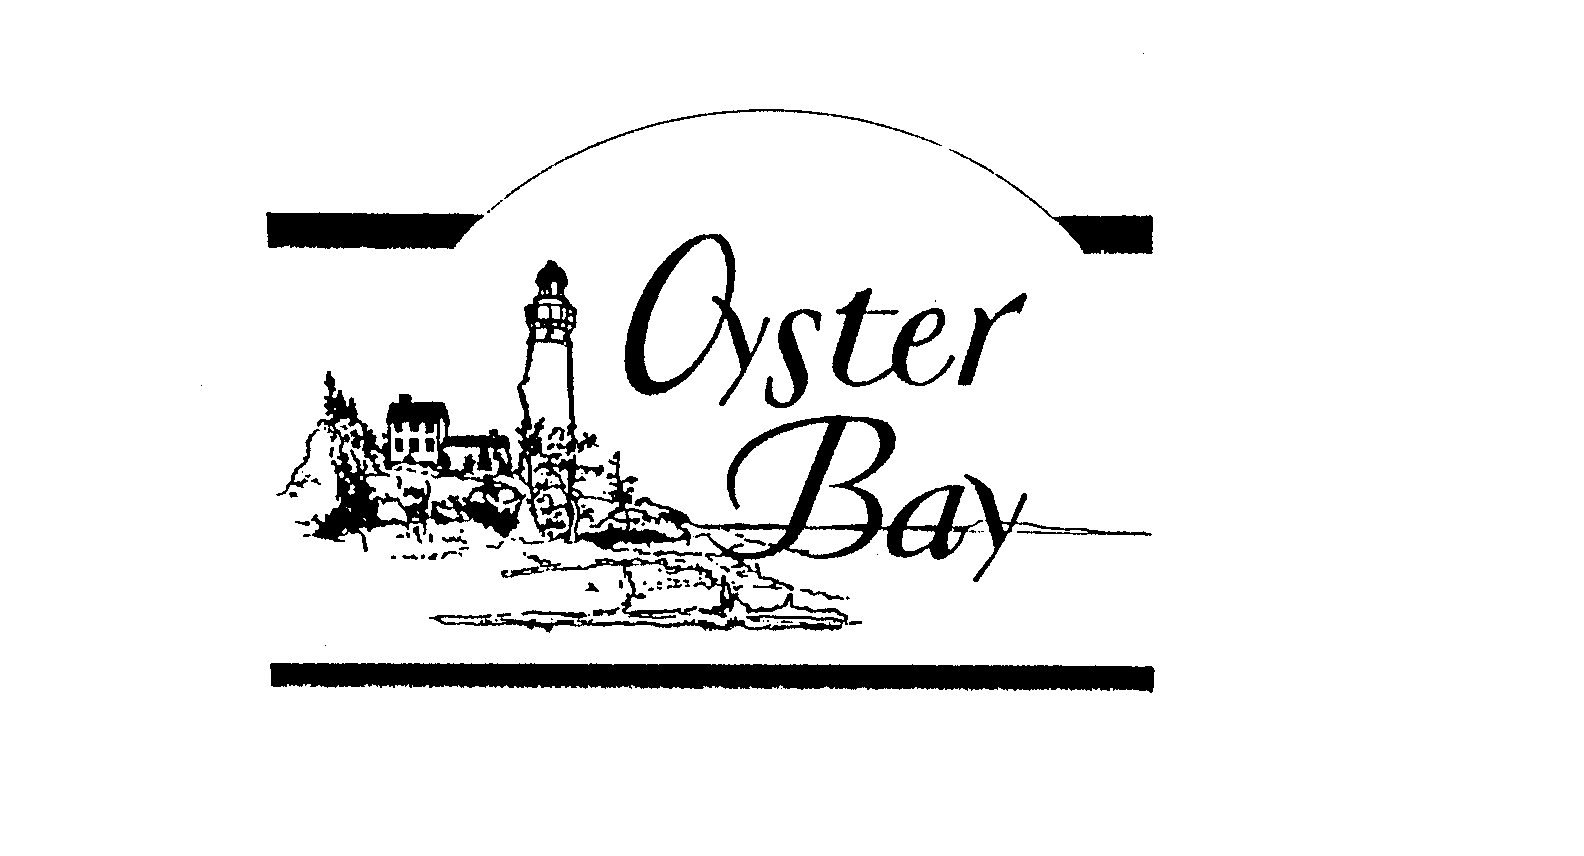 OYSTER BAY